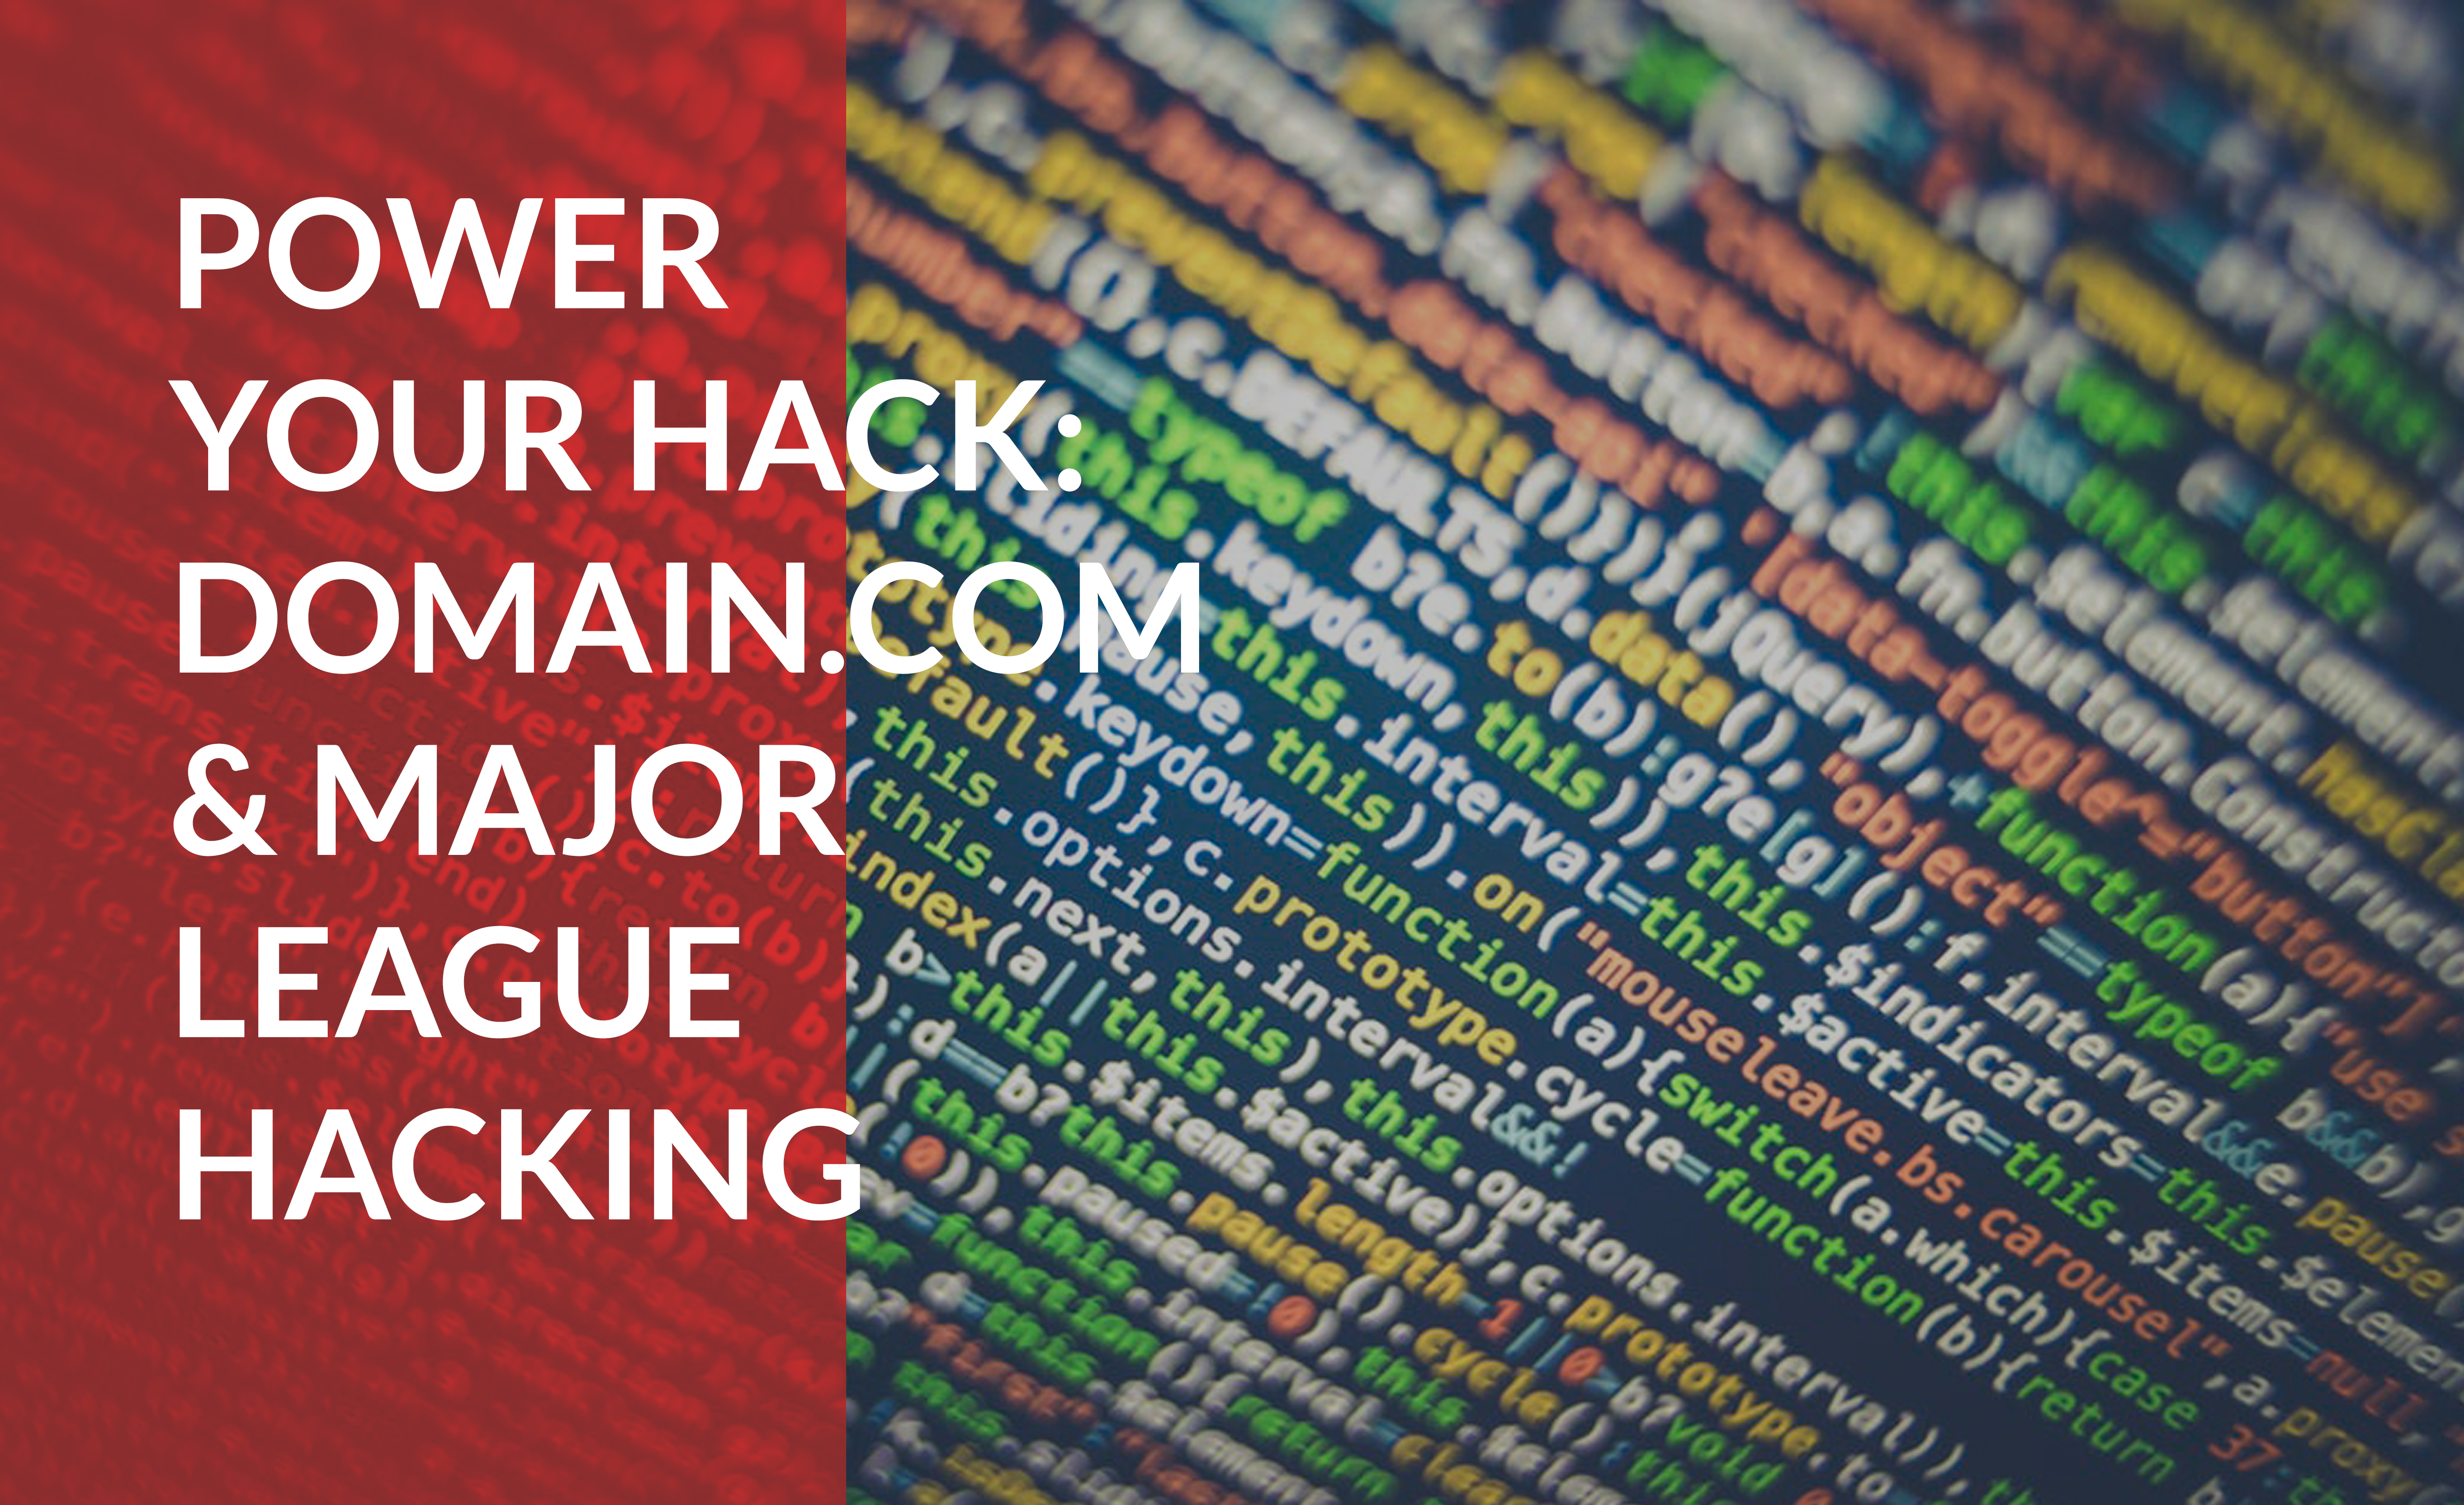 Learn to power your hack with Domain.com and Major League Hacking